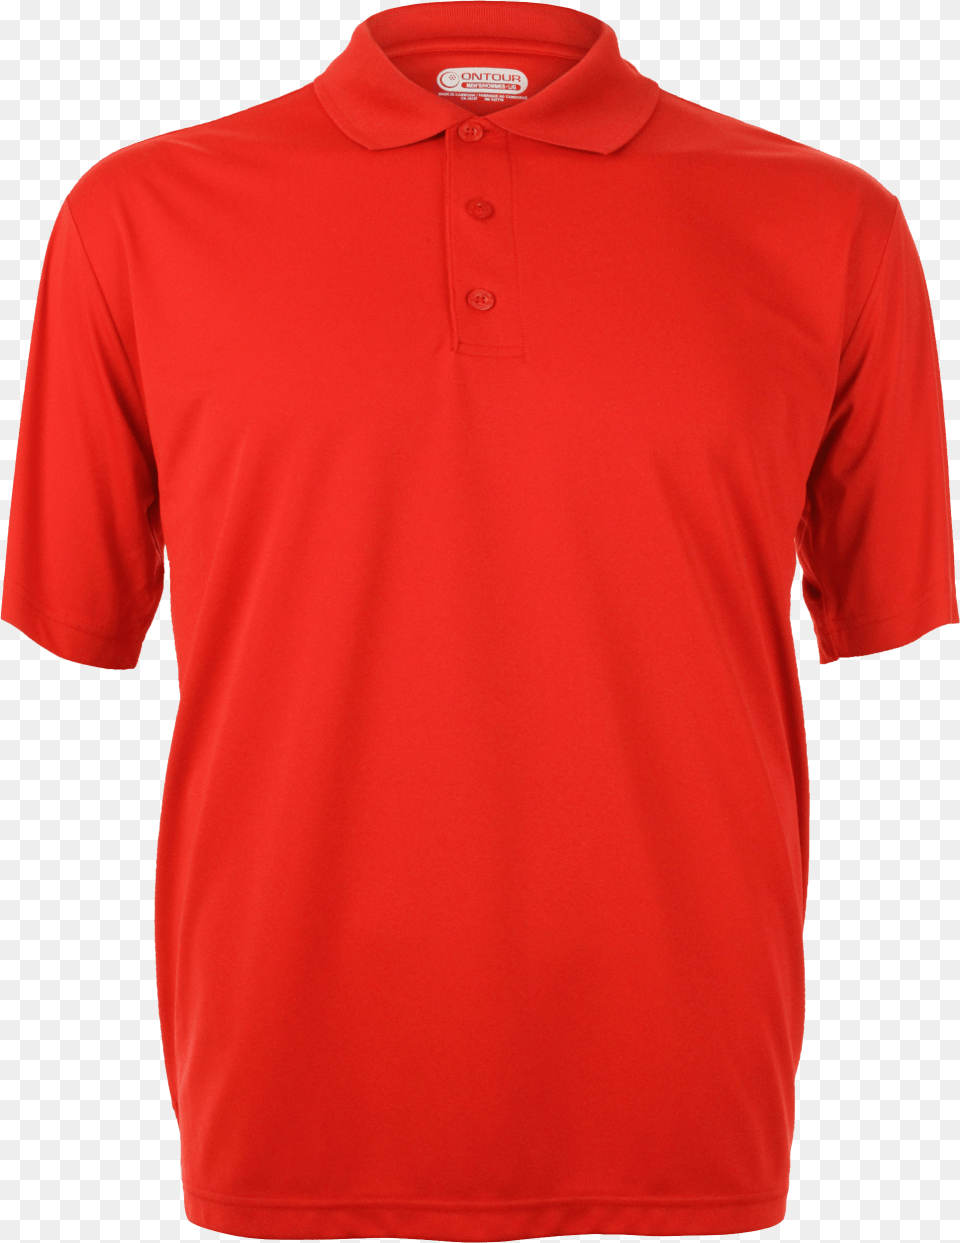 Shirt Transparent Image And Clipart Red Polo Shirt, Clothing, T-shirt, Sleeve Png